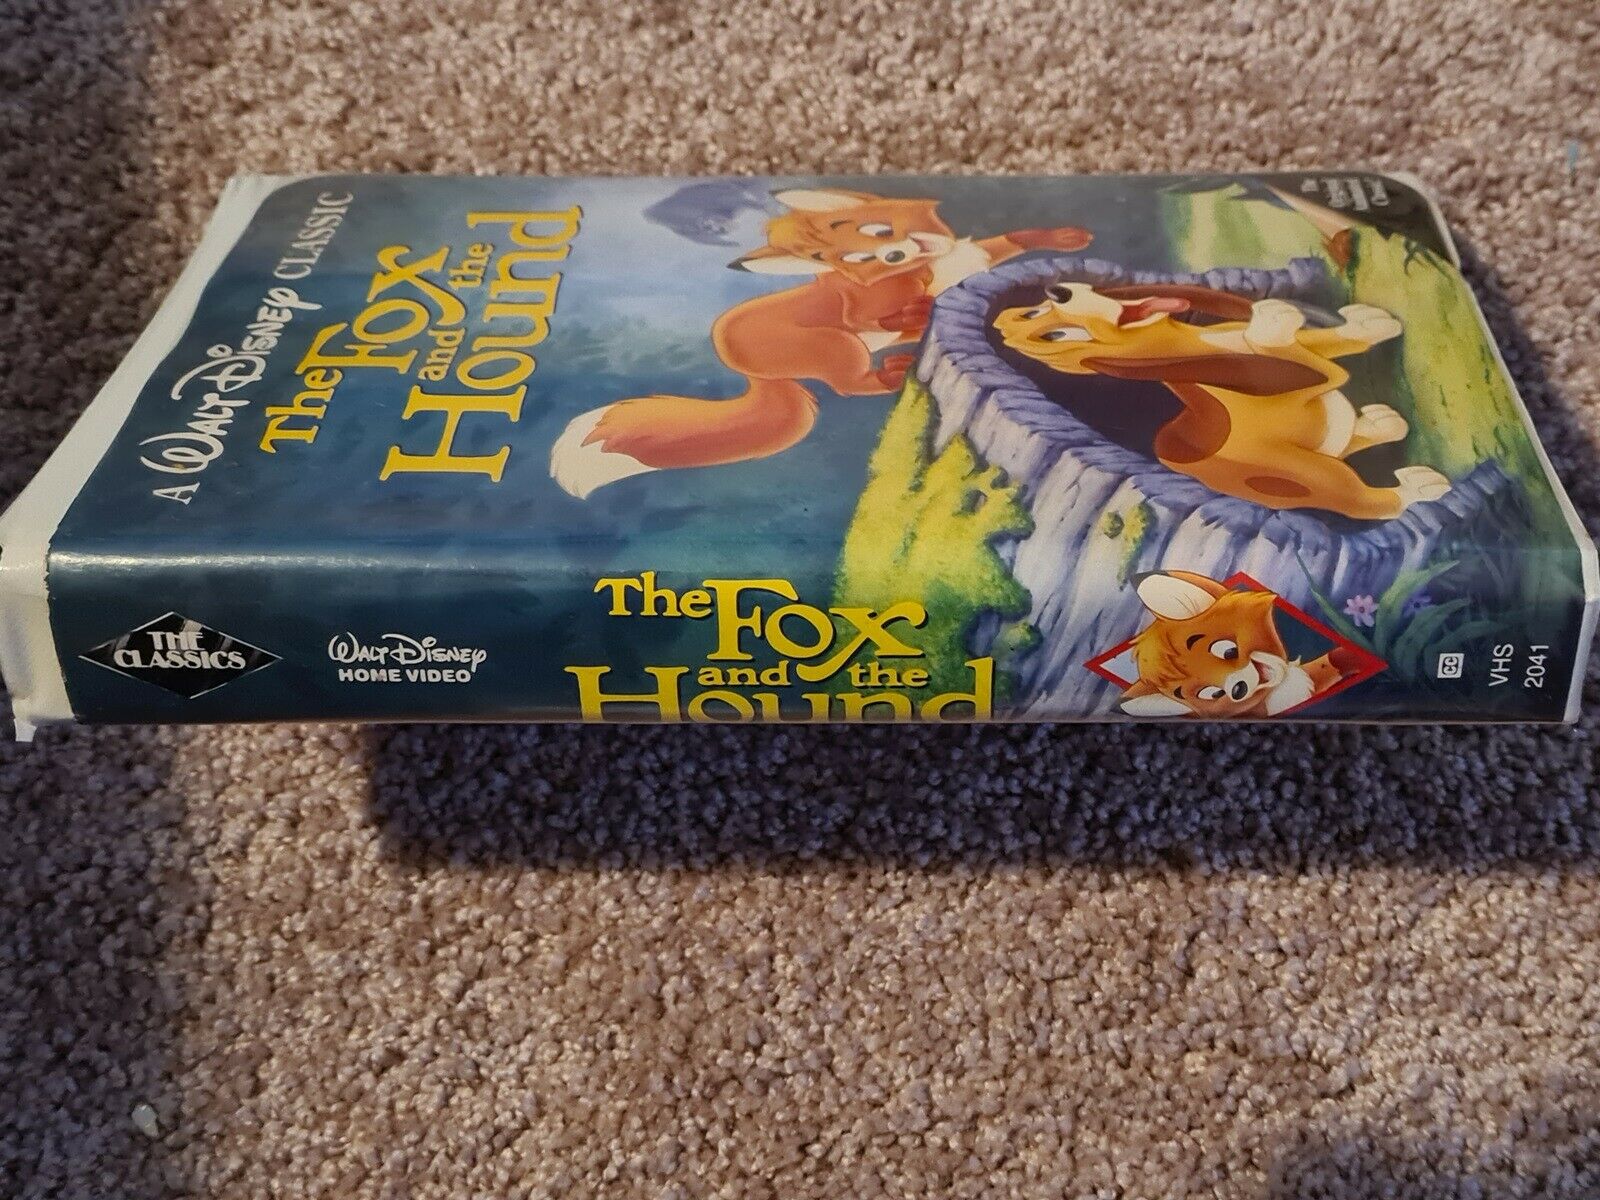 Tegnefilm, The fox and the hound